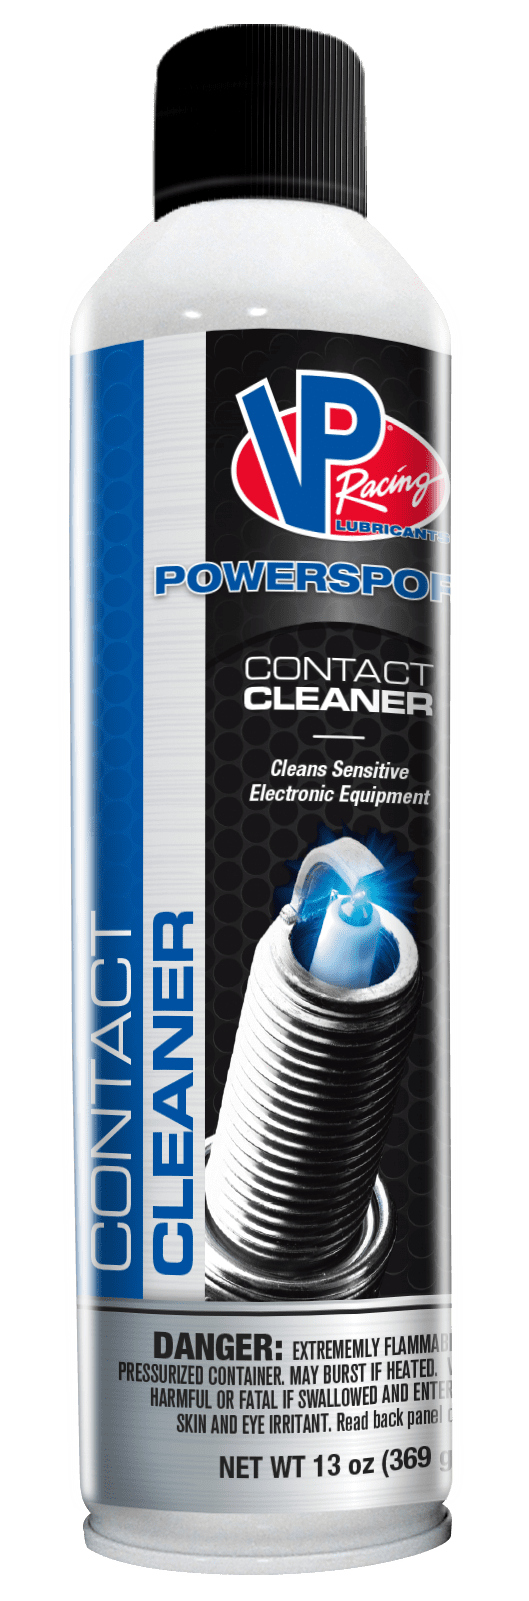 Contact Cleaner: VP Contact Cleaner Spray